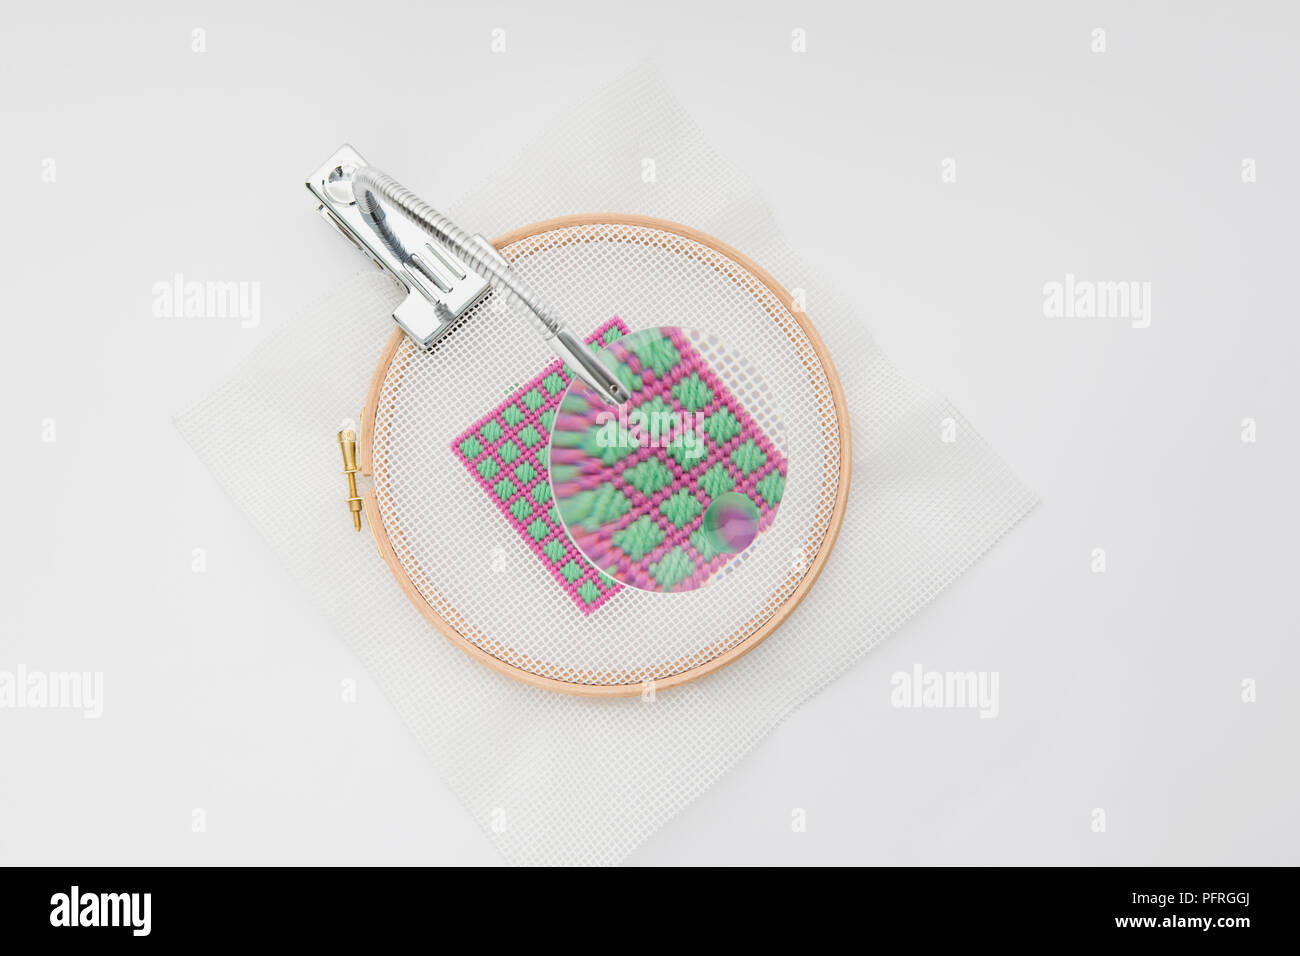 Magnifier attached to piece of needlepoint work Stock Photo